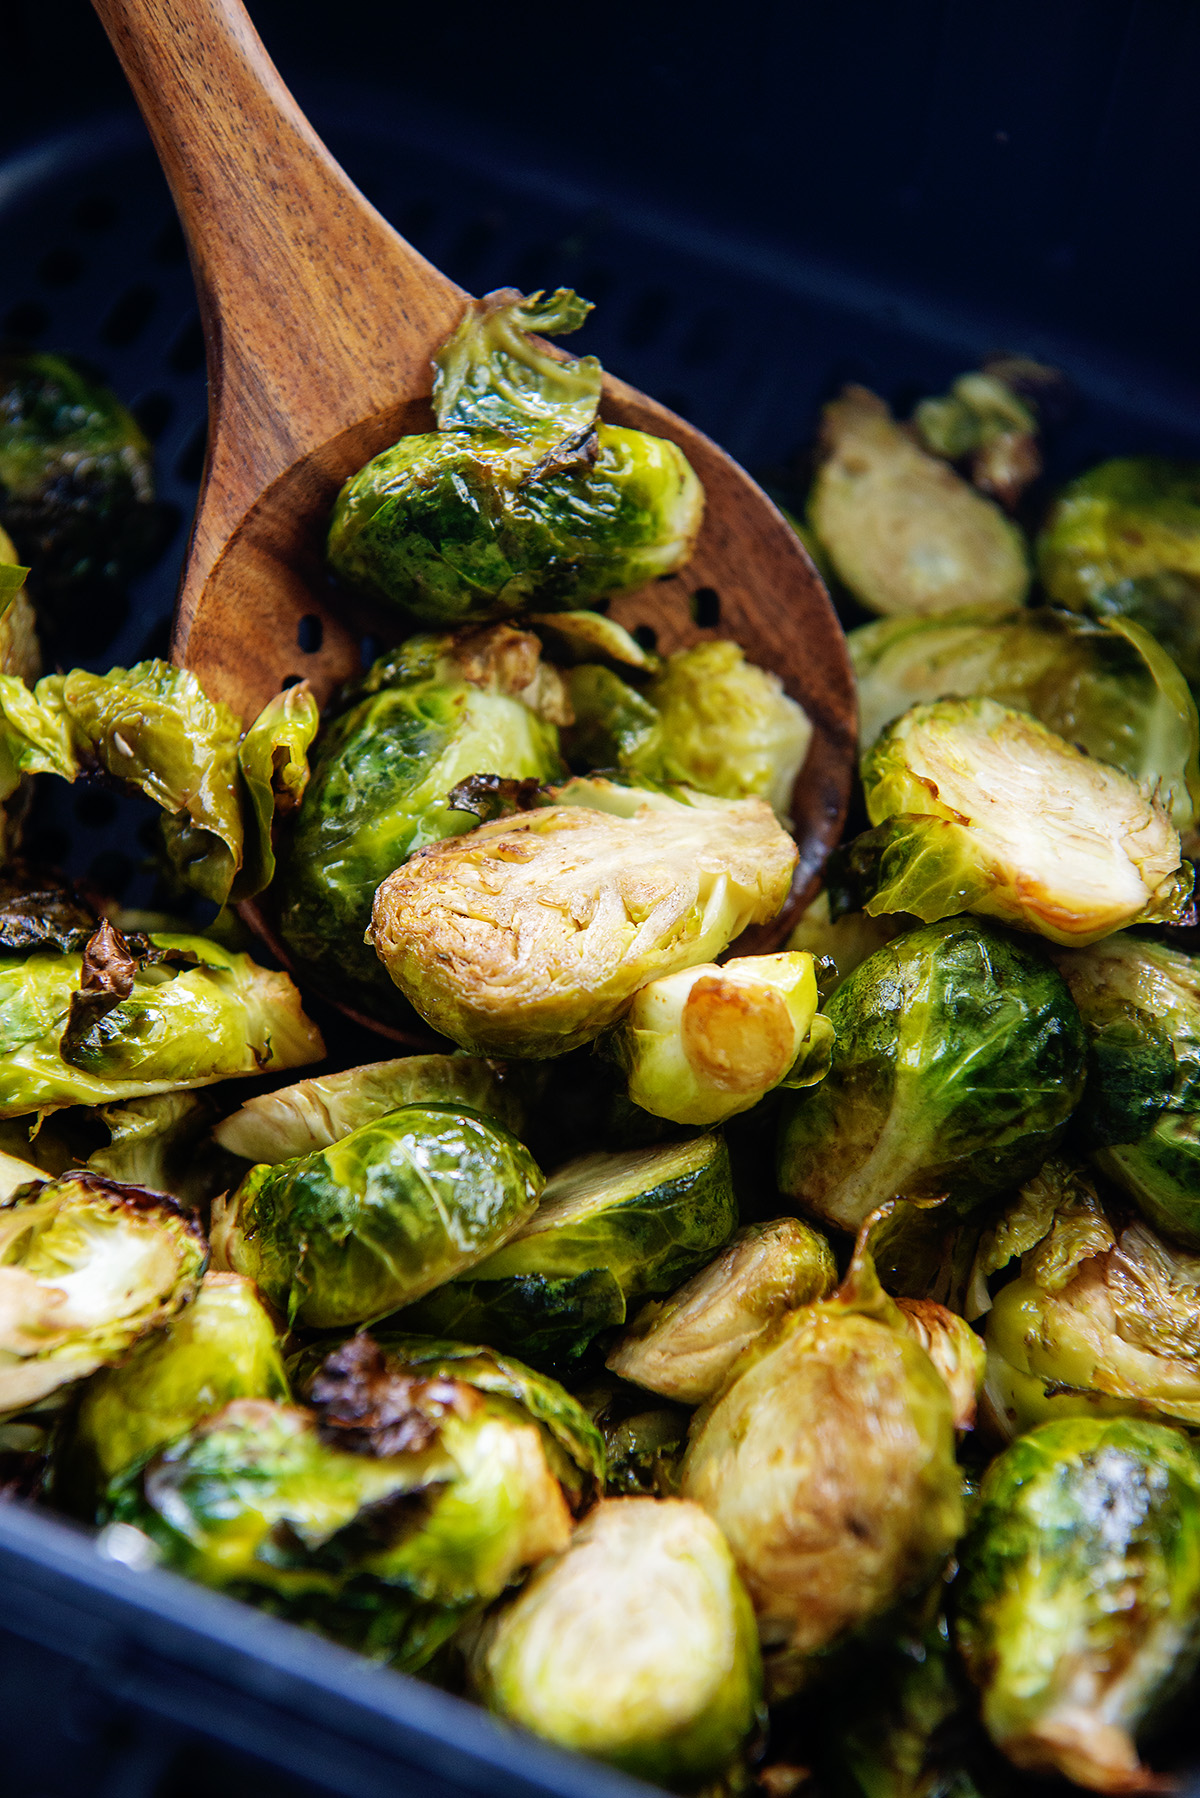 A wooden spoon dipping into a pile of brussels sprouts.